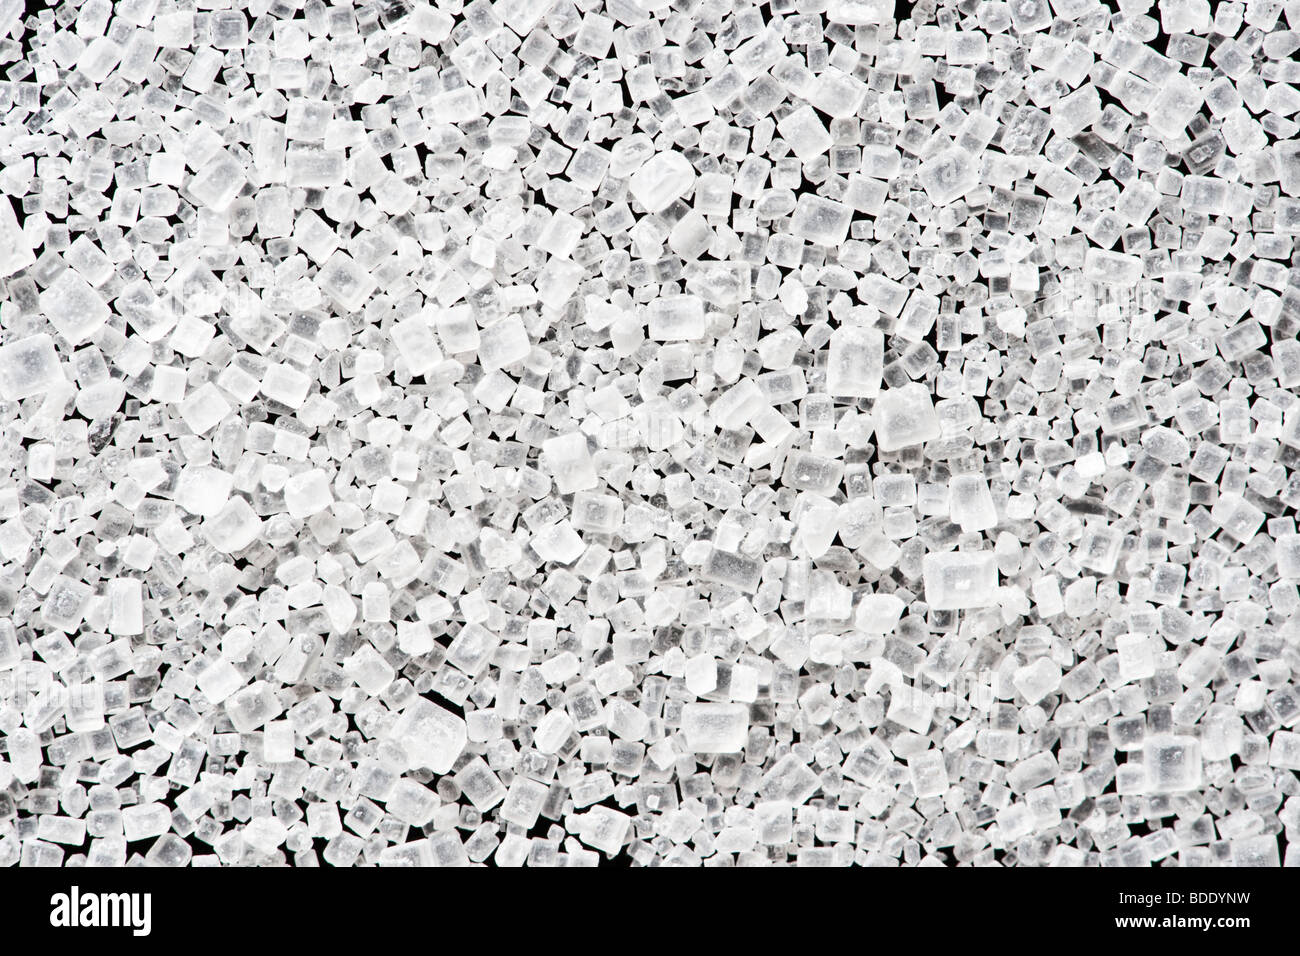 Granulated sugar crystals on black background Stock Photo